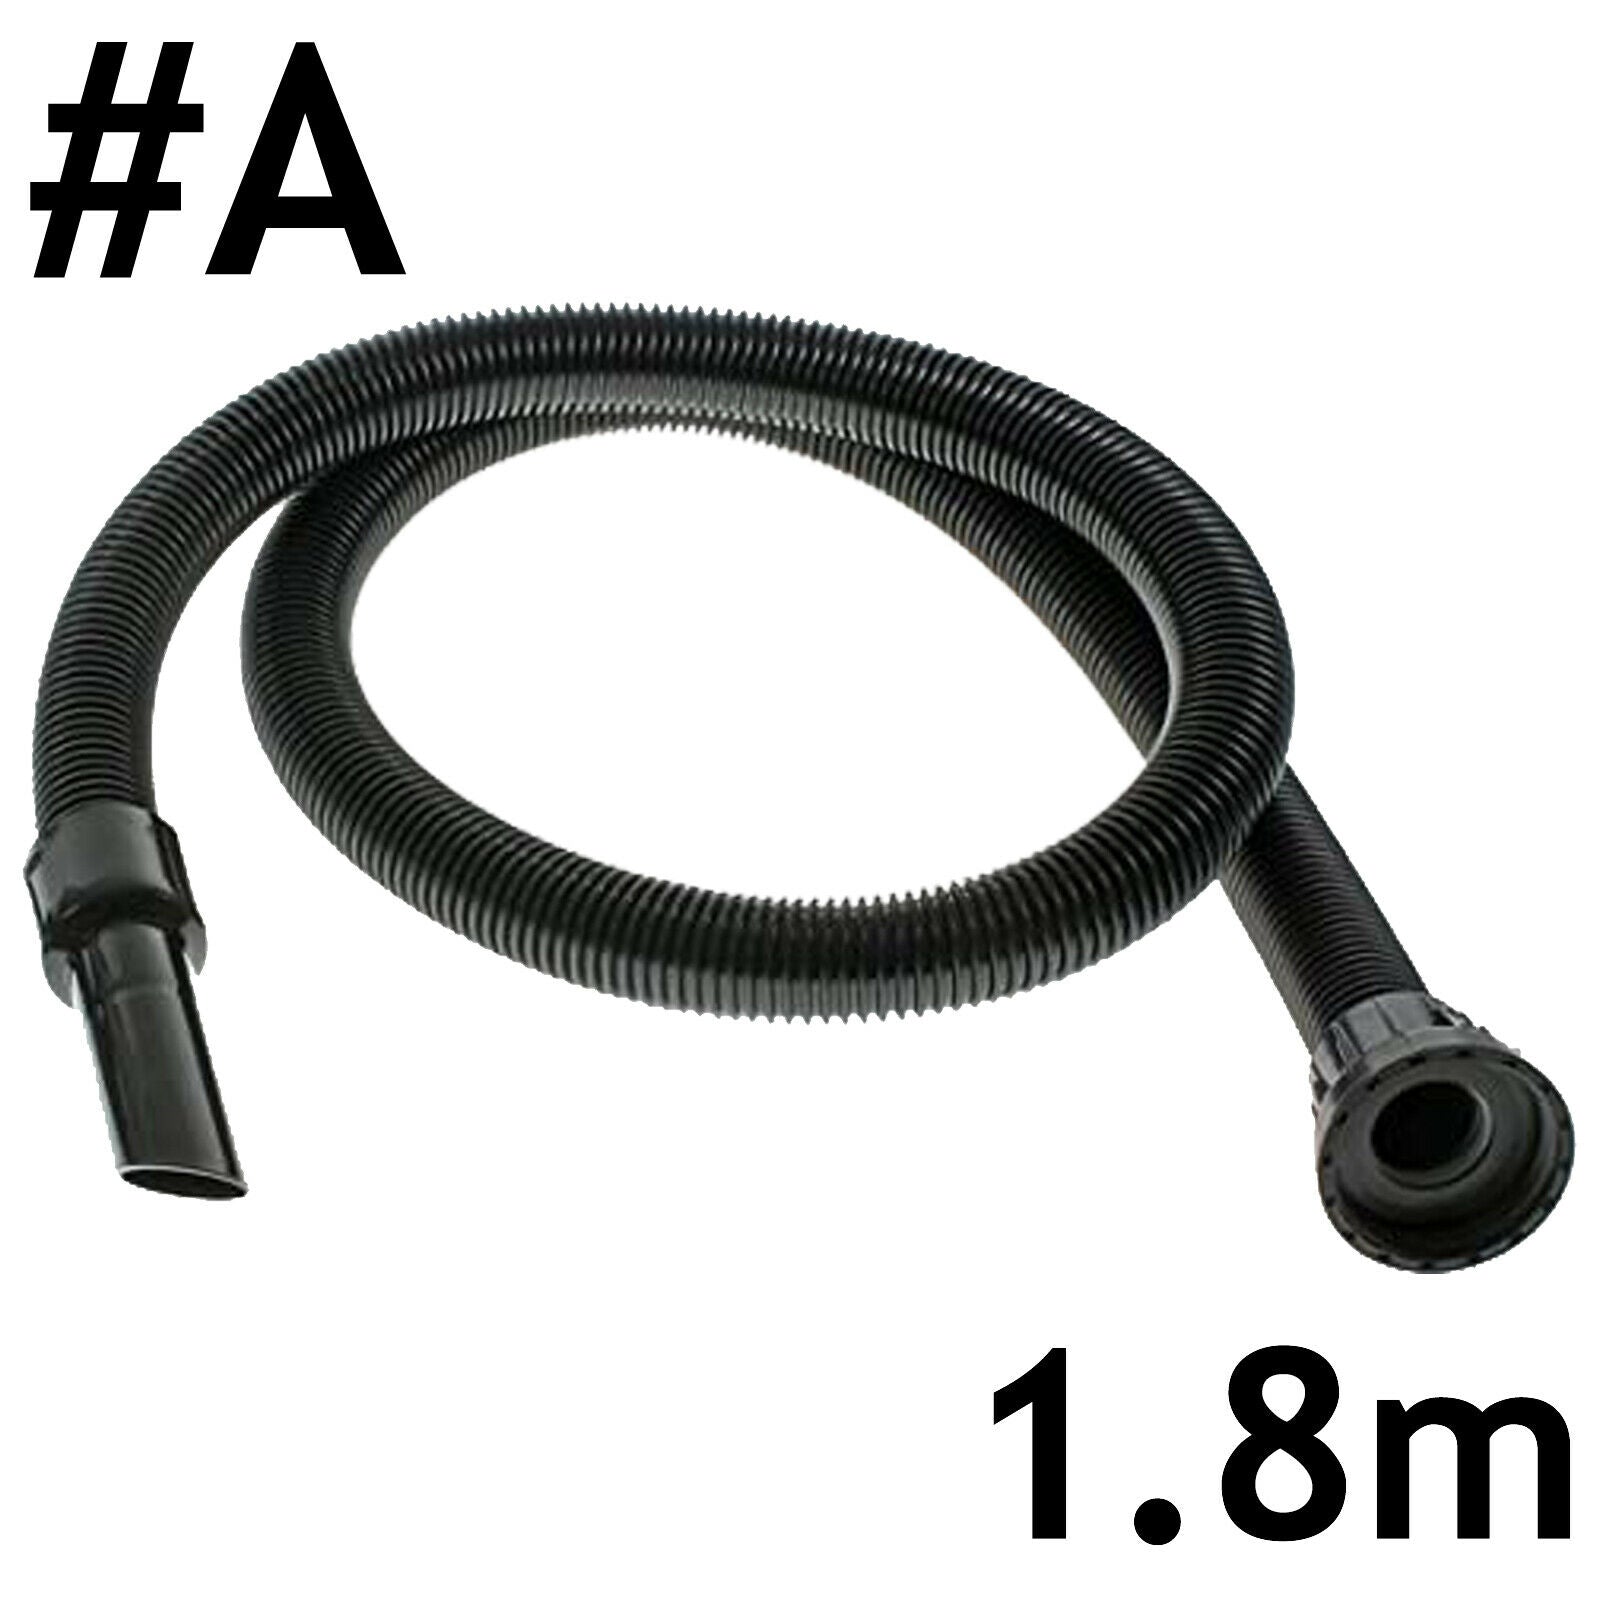 Hose for NUMATIC Vacuum HENRY Hoover Pipe Kit GEORGE Replacement Parts Cuff 32mm